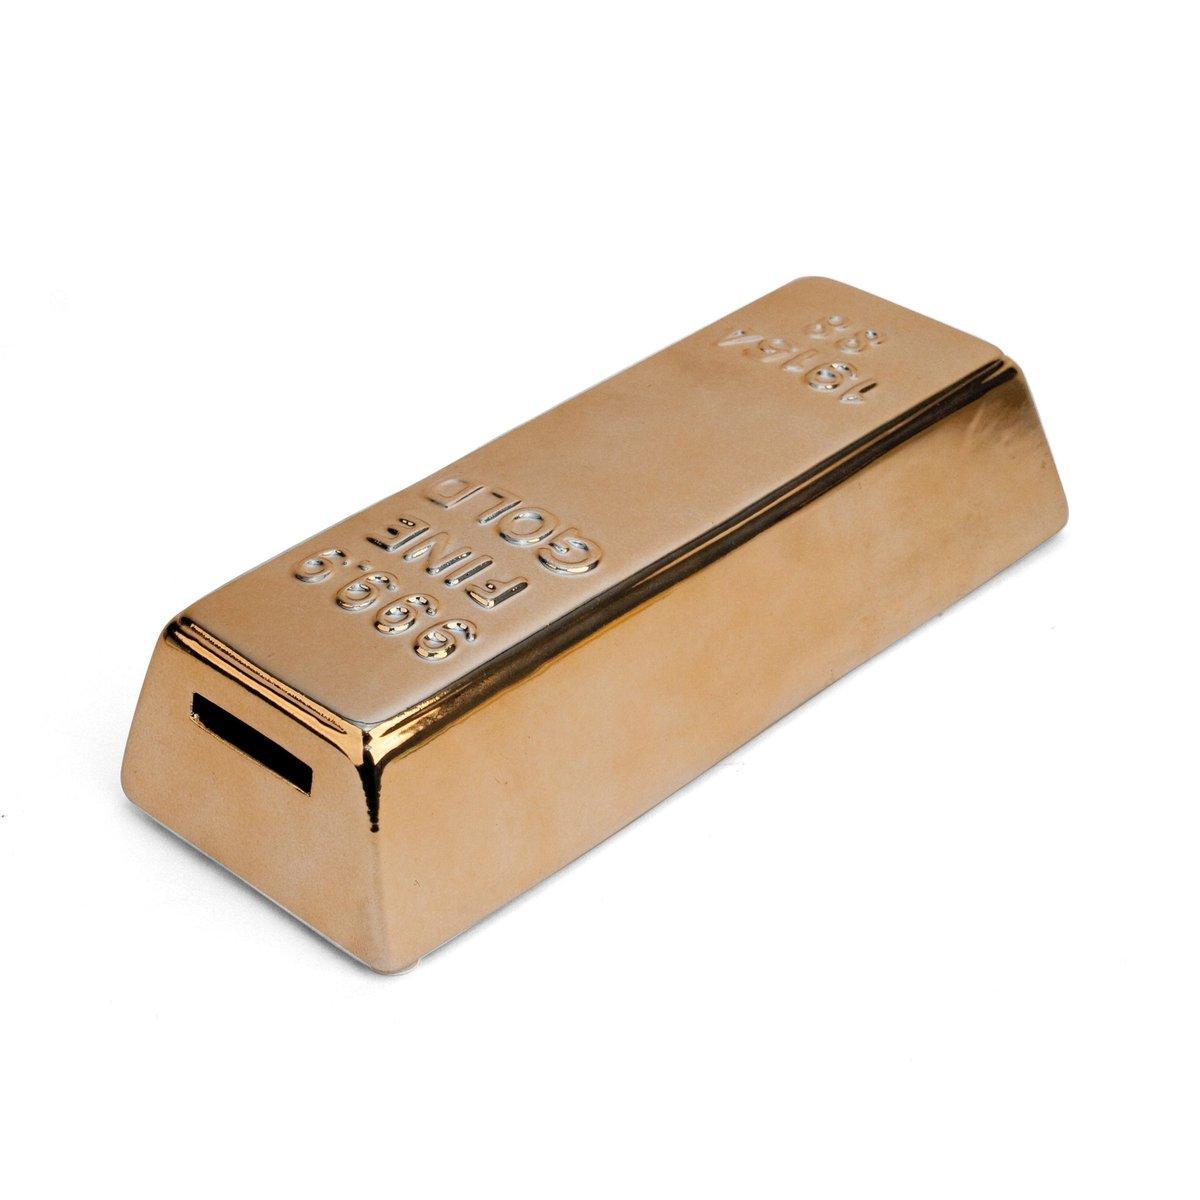 Kikkerland Ceramic Gold Bar Coin Bank - Fancy Looking Gold Bar Money Bank, Ideal for Organizing and Saving Coins